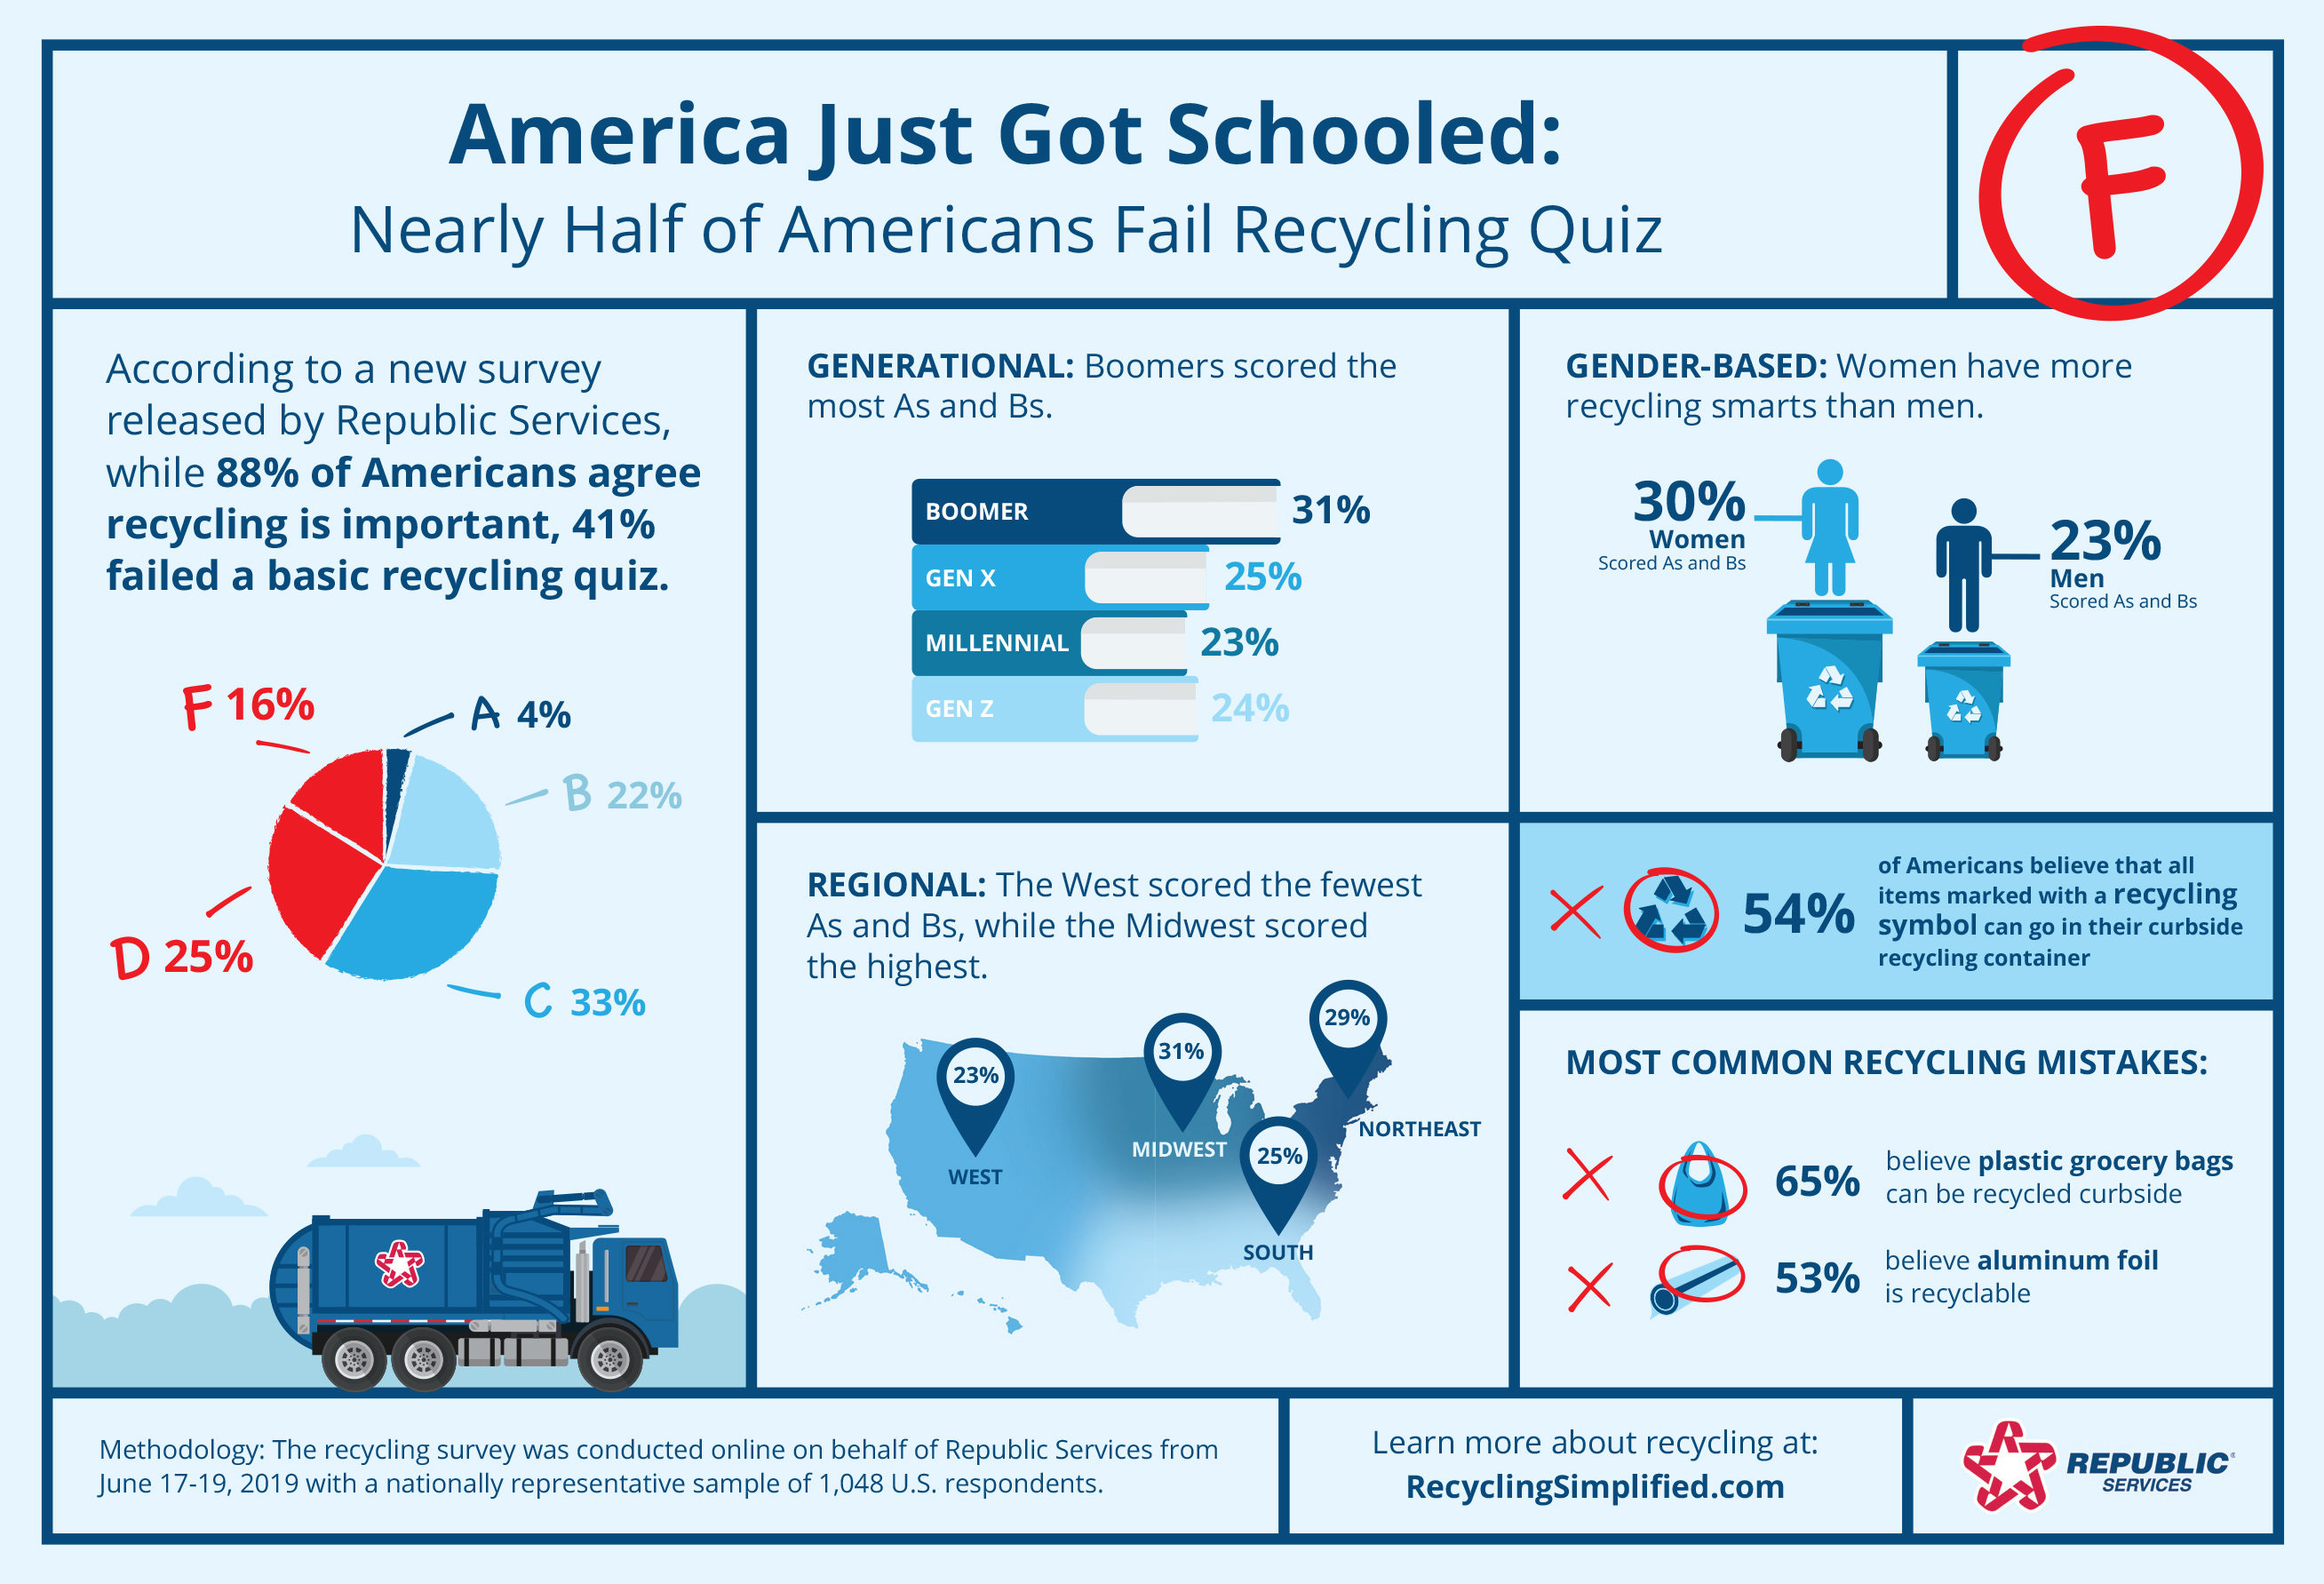 A recent Republic Services survey shows that while 88% of Americans agree recycling is important, they are confused about what materials belong in the recycling bin. In fact, 41% of the respondents failed a basic recycling quiz, despite 69% giving themselves an A or B when asked how much they knew about recycling.